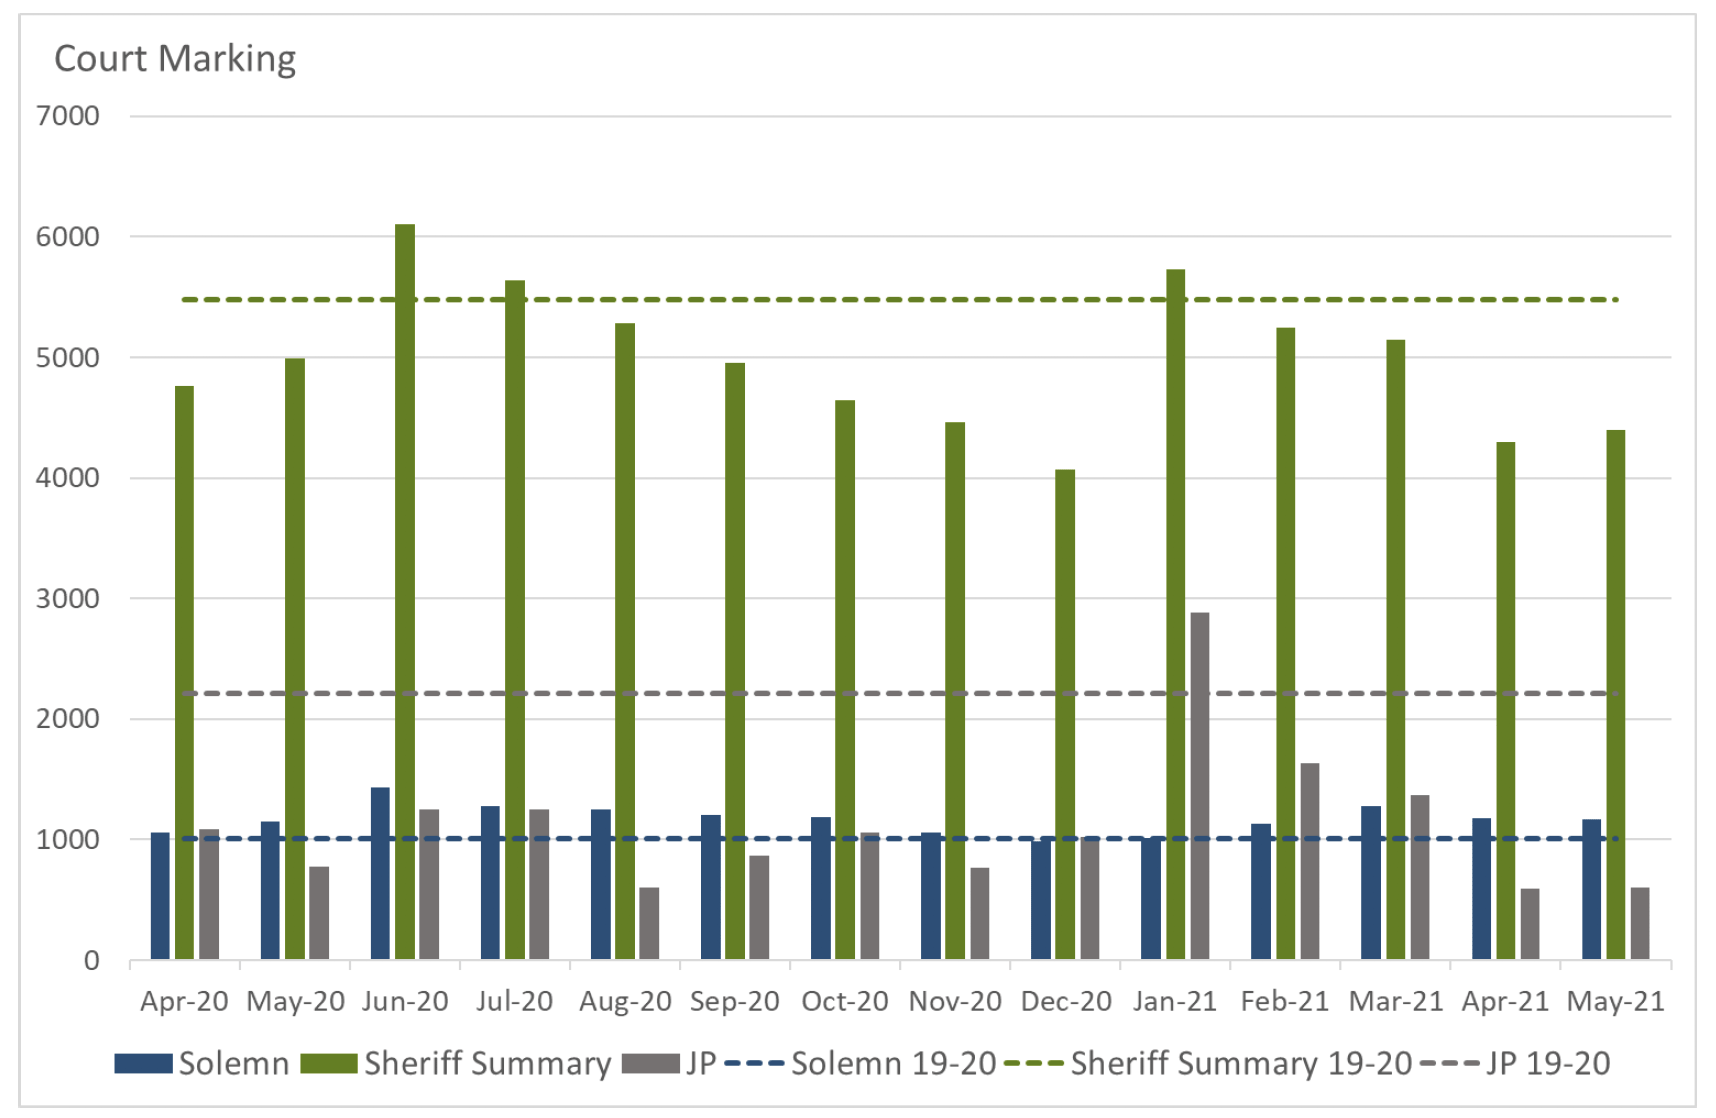 Bar chart showing the number of subjects marked for different court proceedings by month.